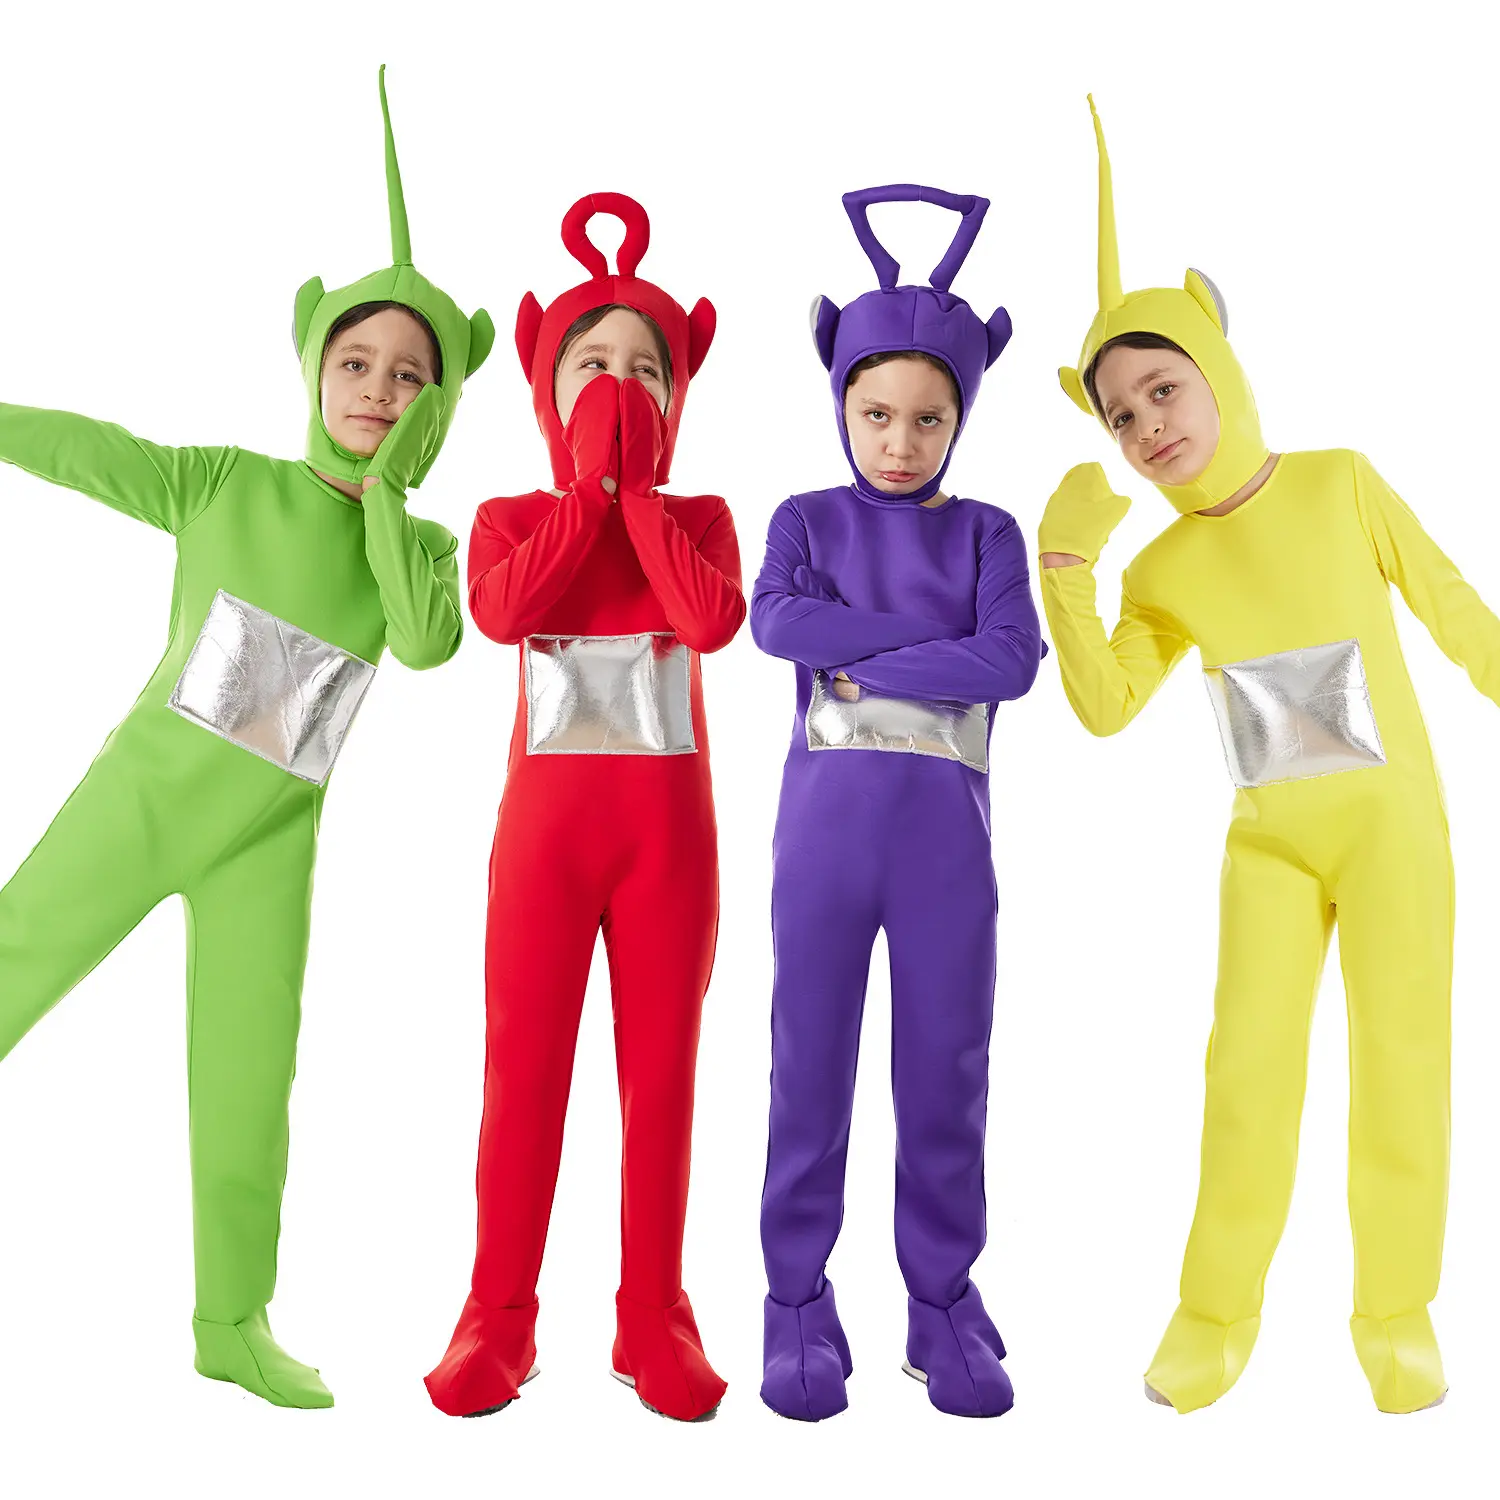 Chinese Manufacturer Teletub Baby Halloween Costumes For Kids Po and Dipsy Cartoon Characters Cosplay Costume